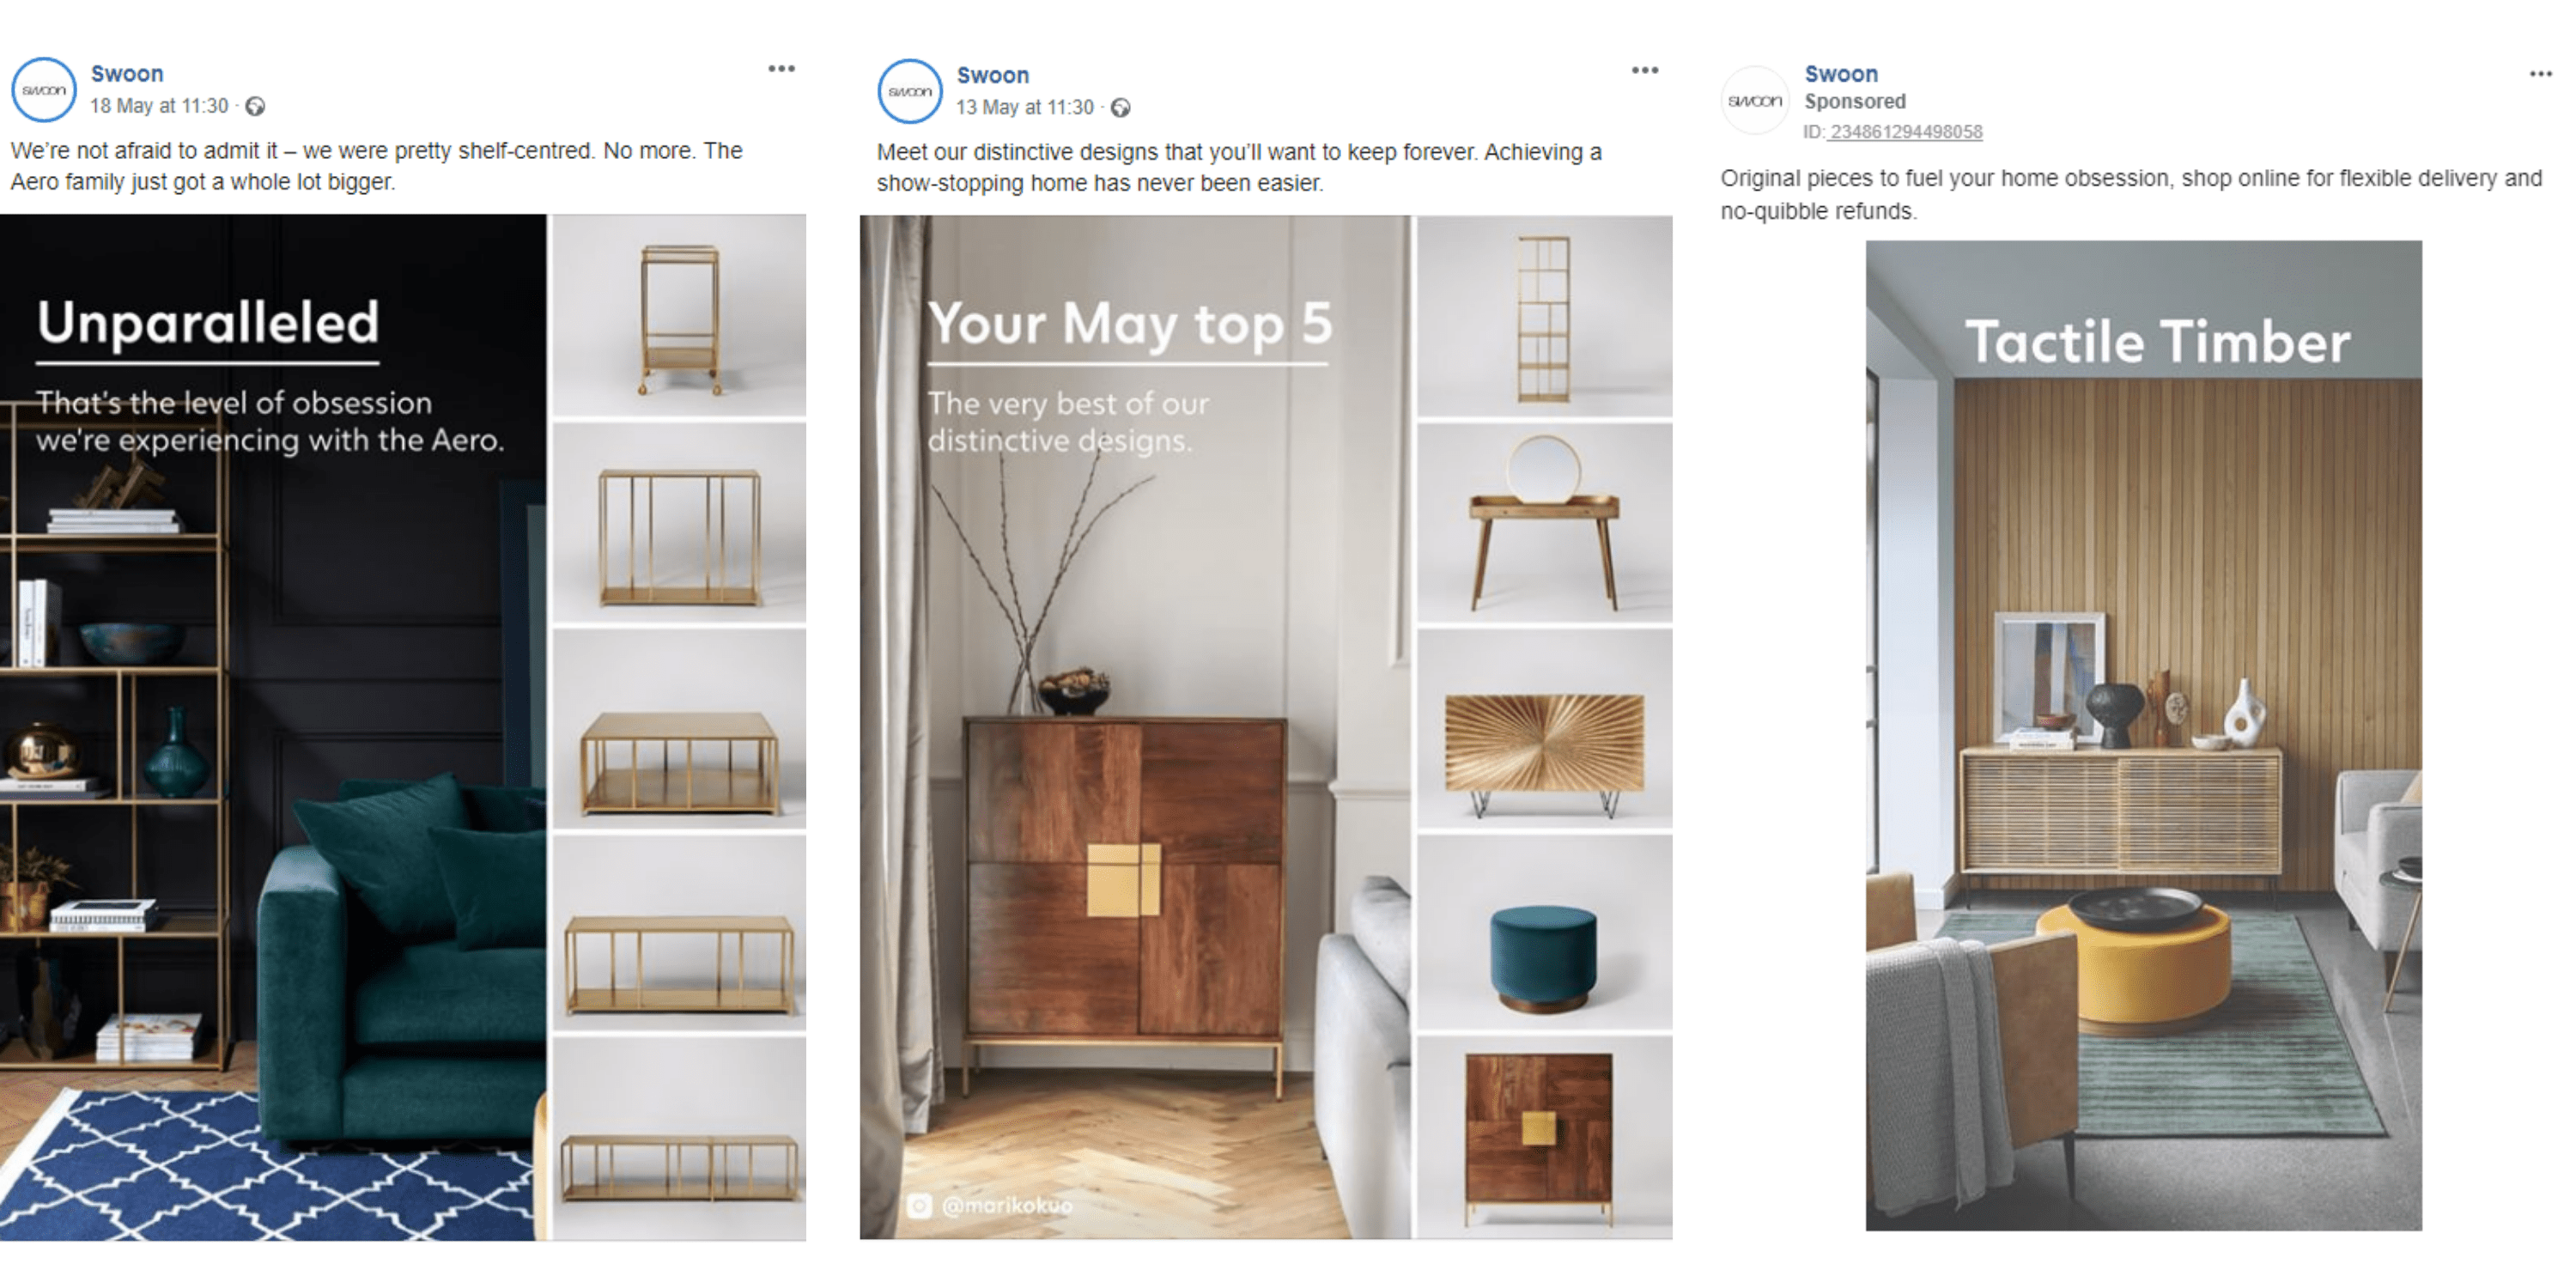 Social ecommerce verticalimage example image